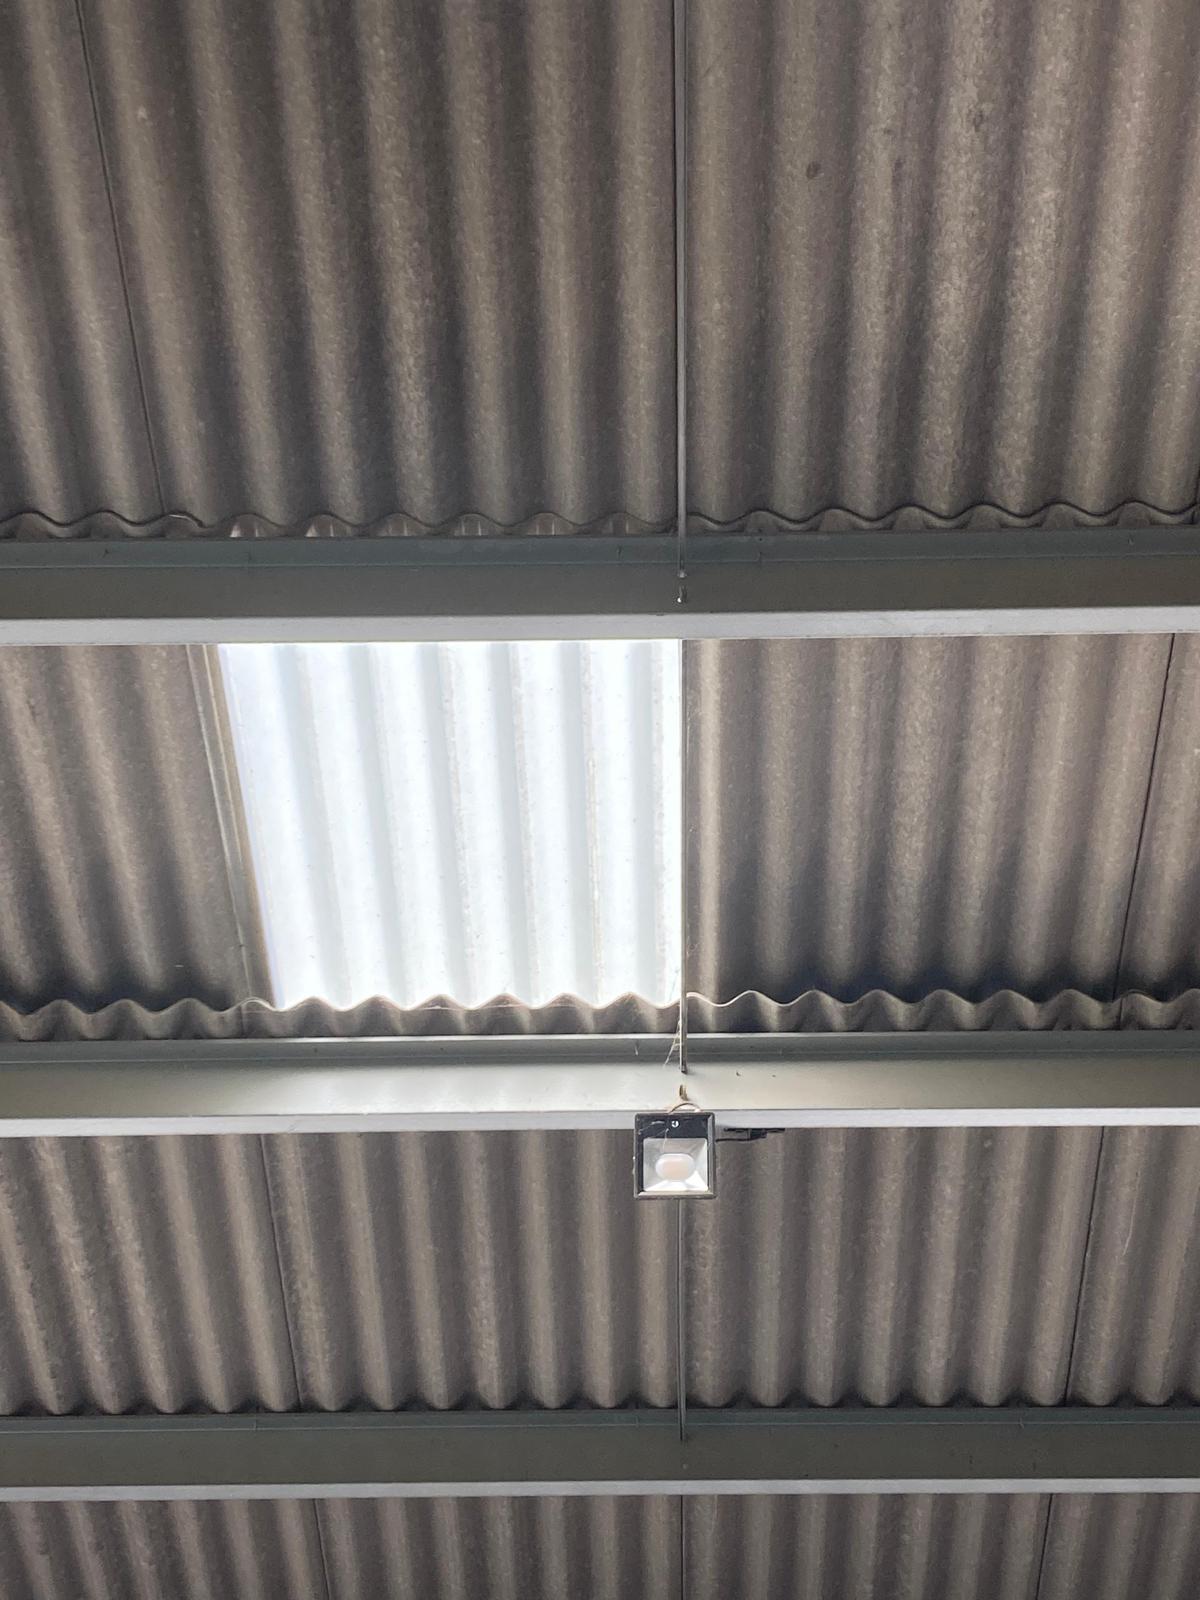 An electric floodlight positioned next to a rooflight.